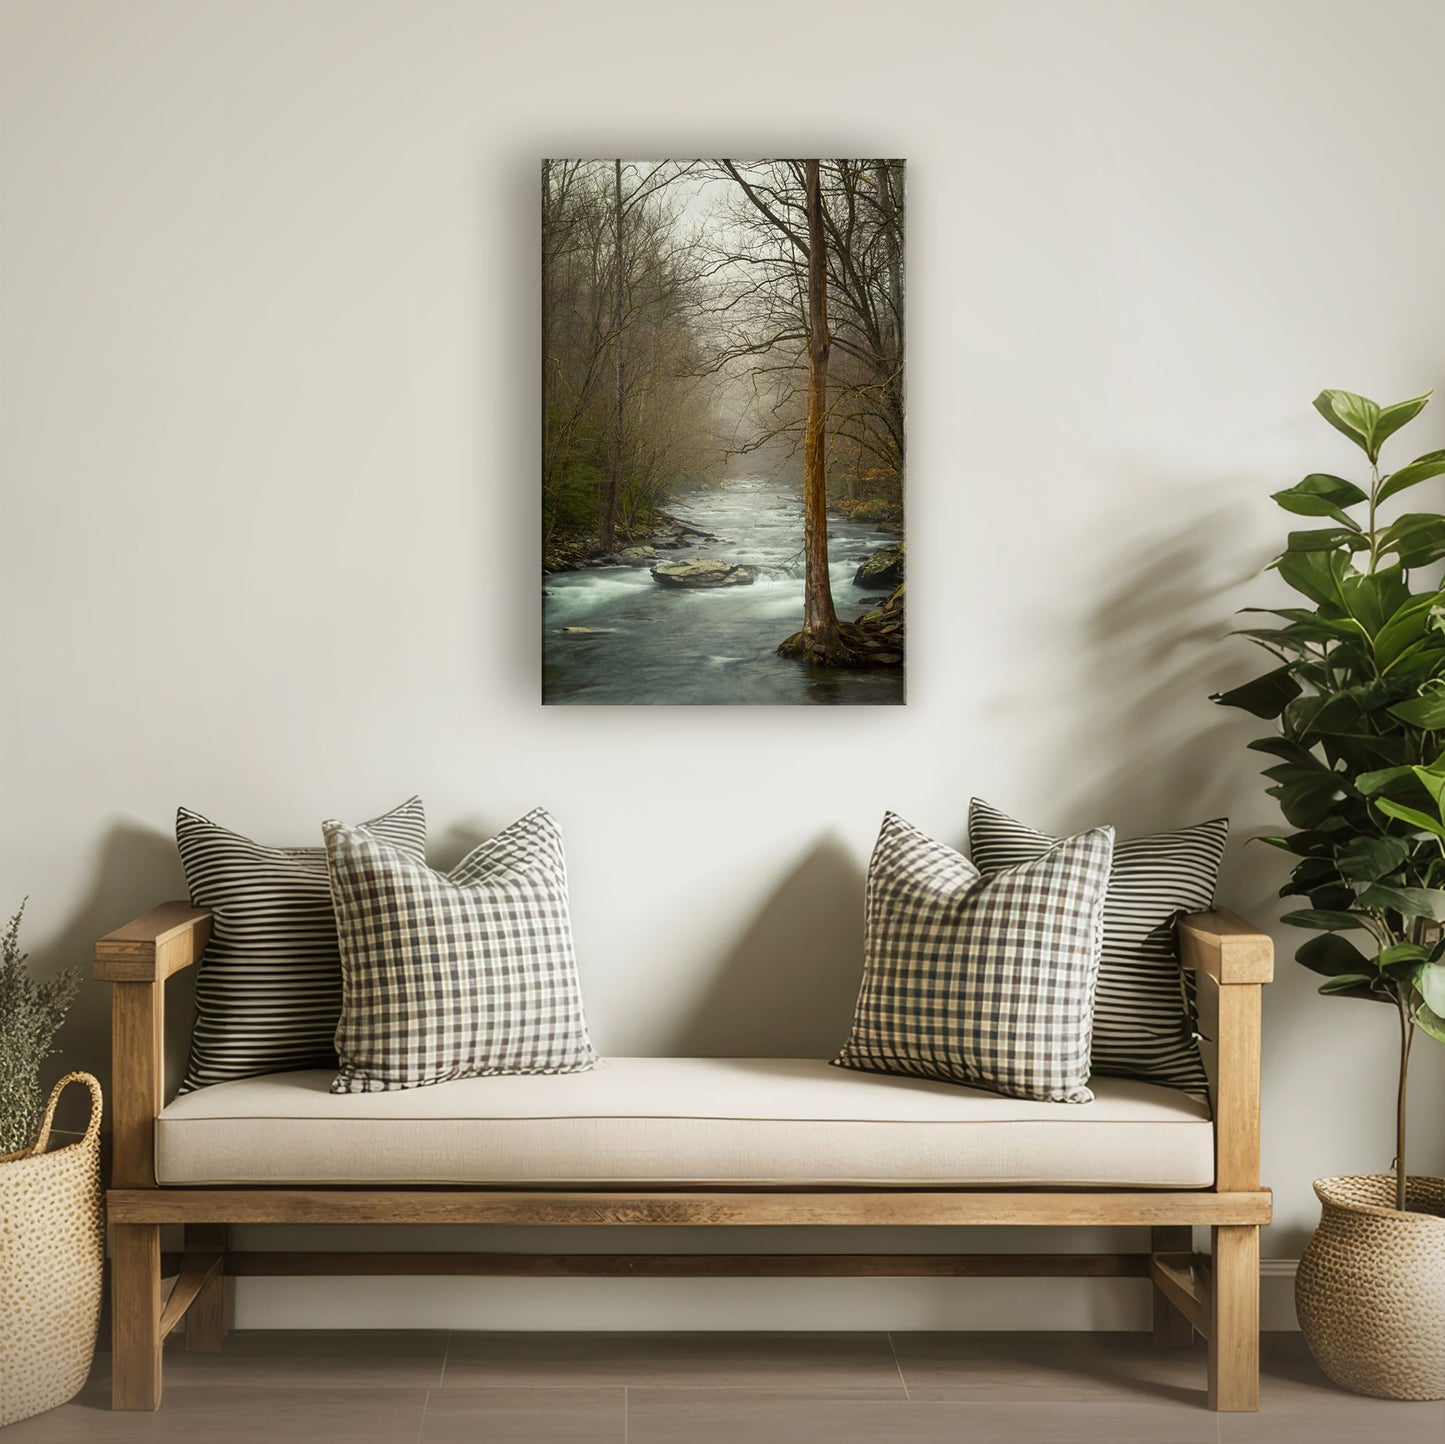 Bring the outdoors in with a stunning canvas print of the Great Smoky Mountains National Park's Little River, offering a natural escape in any room.